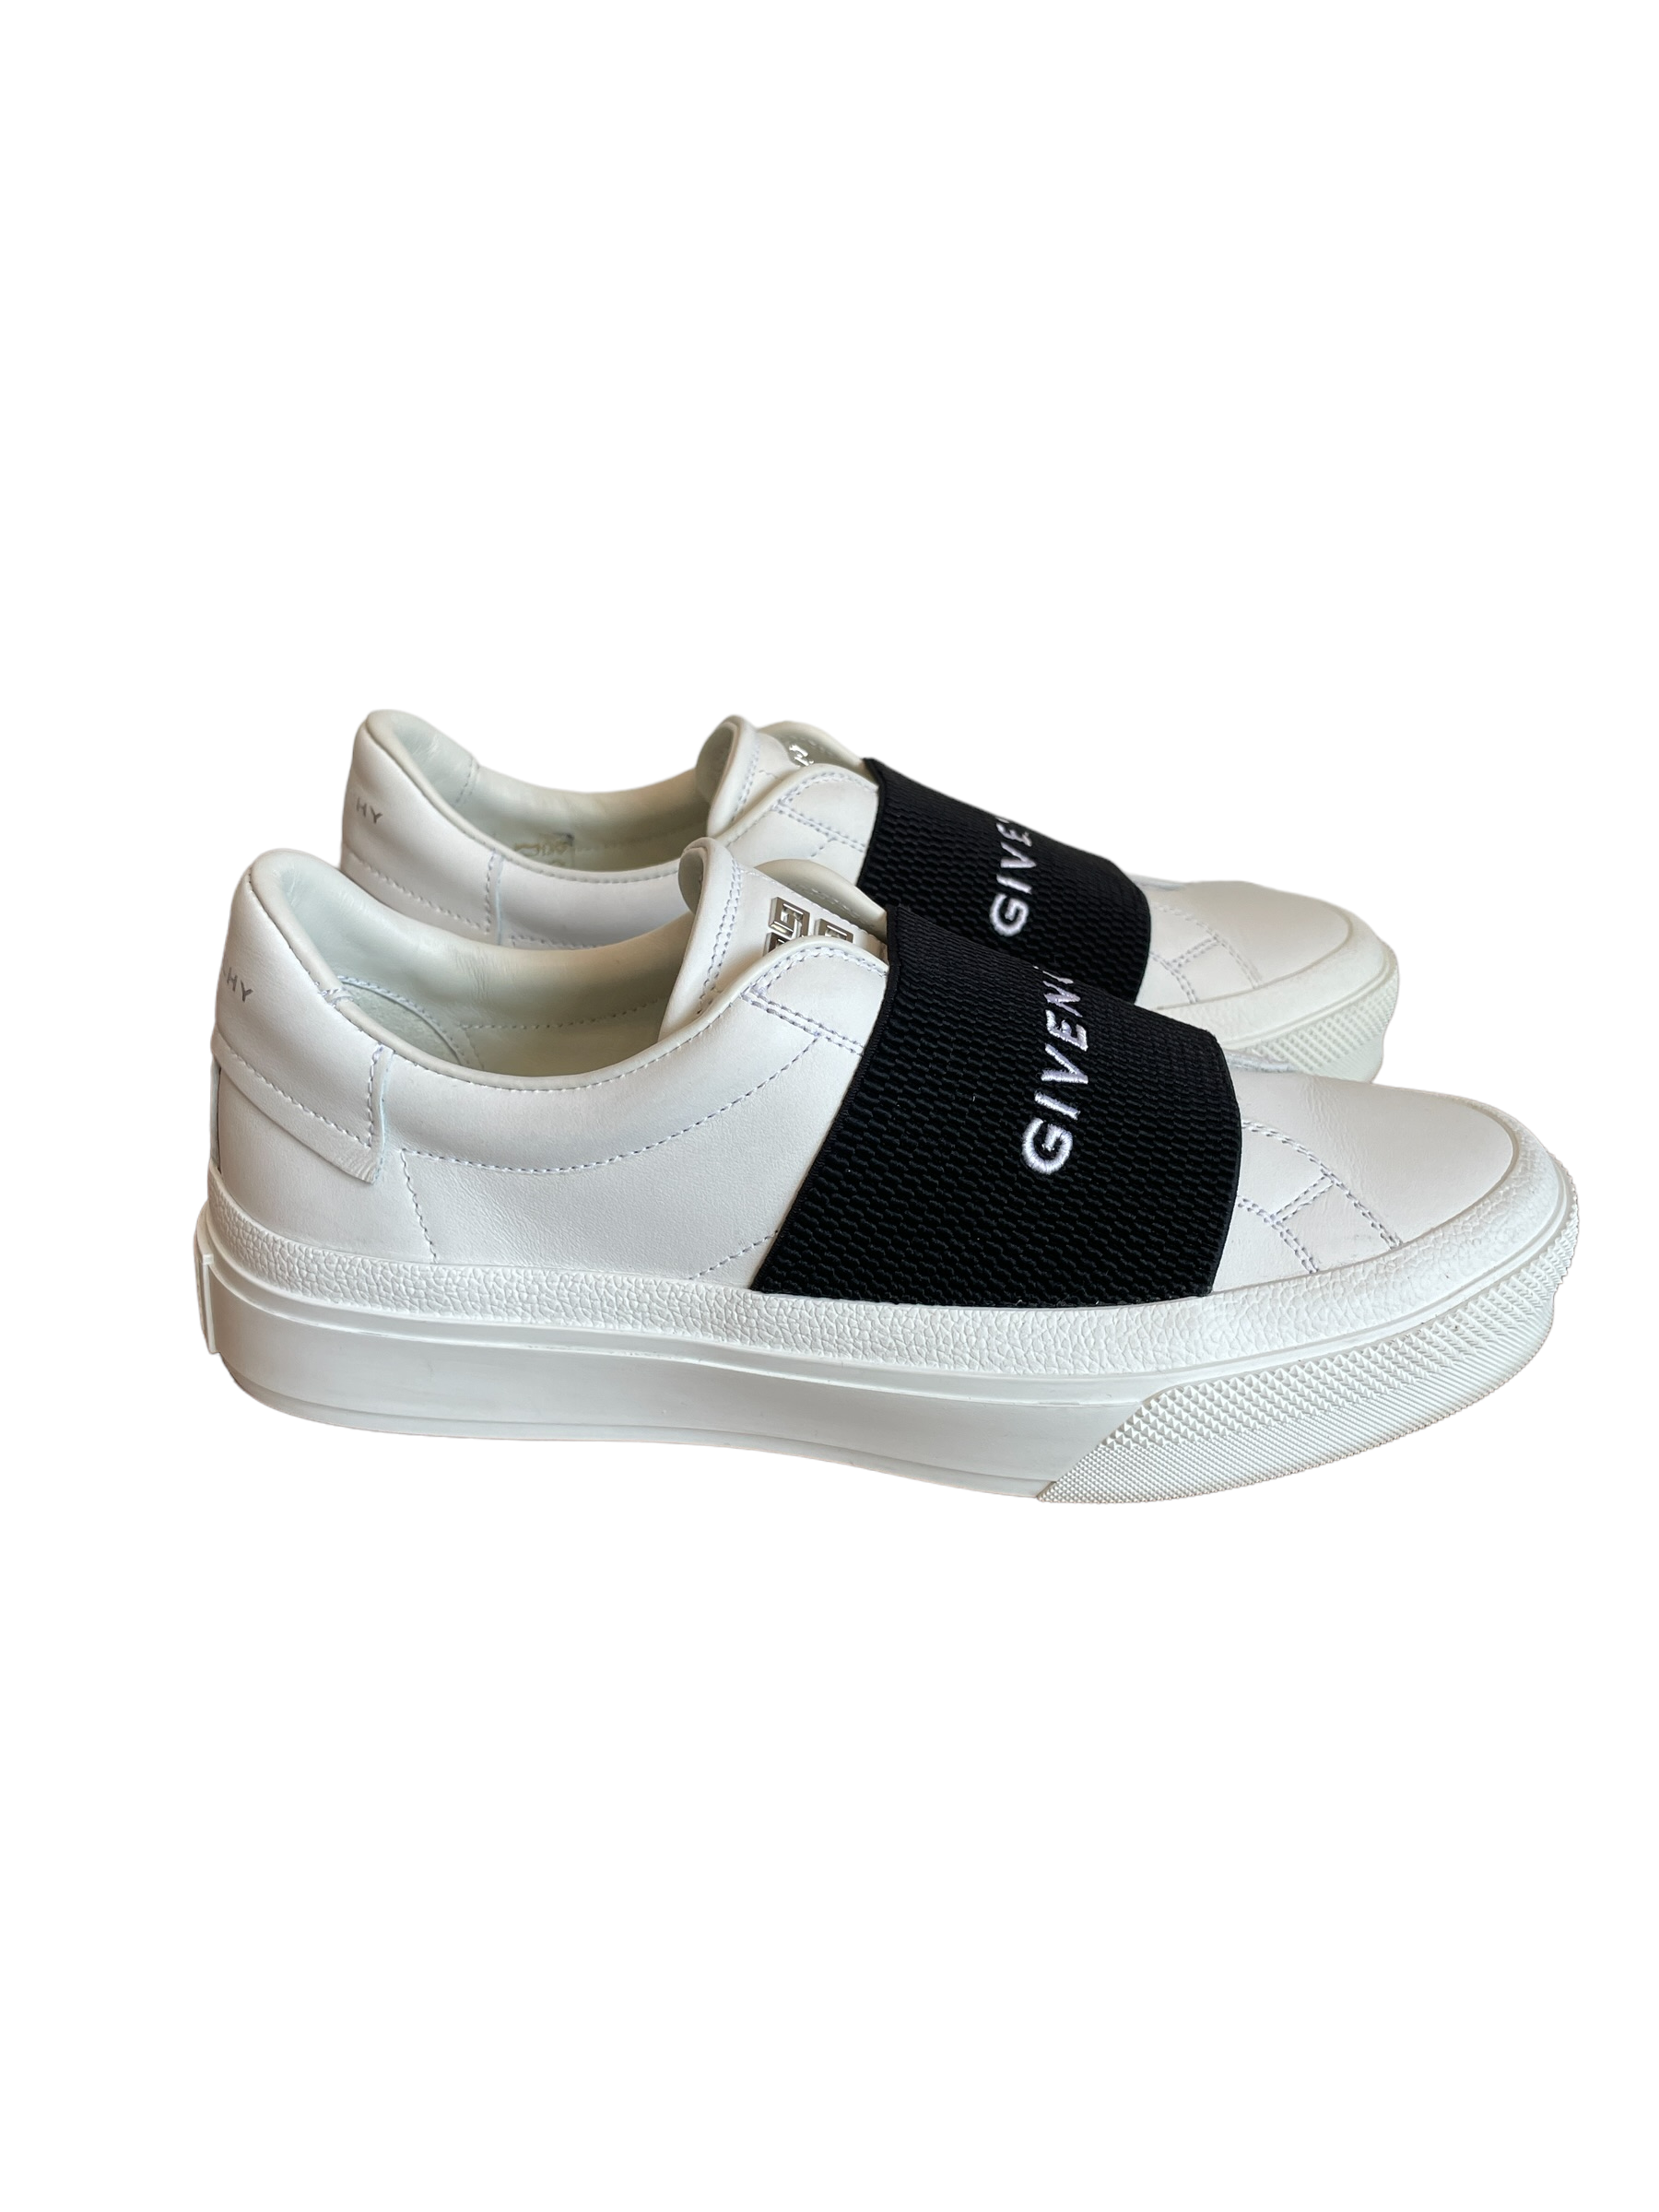 Givenchy Printed Sneaker<br />
Color: White, Black<br />
Size: 37.5